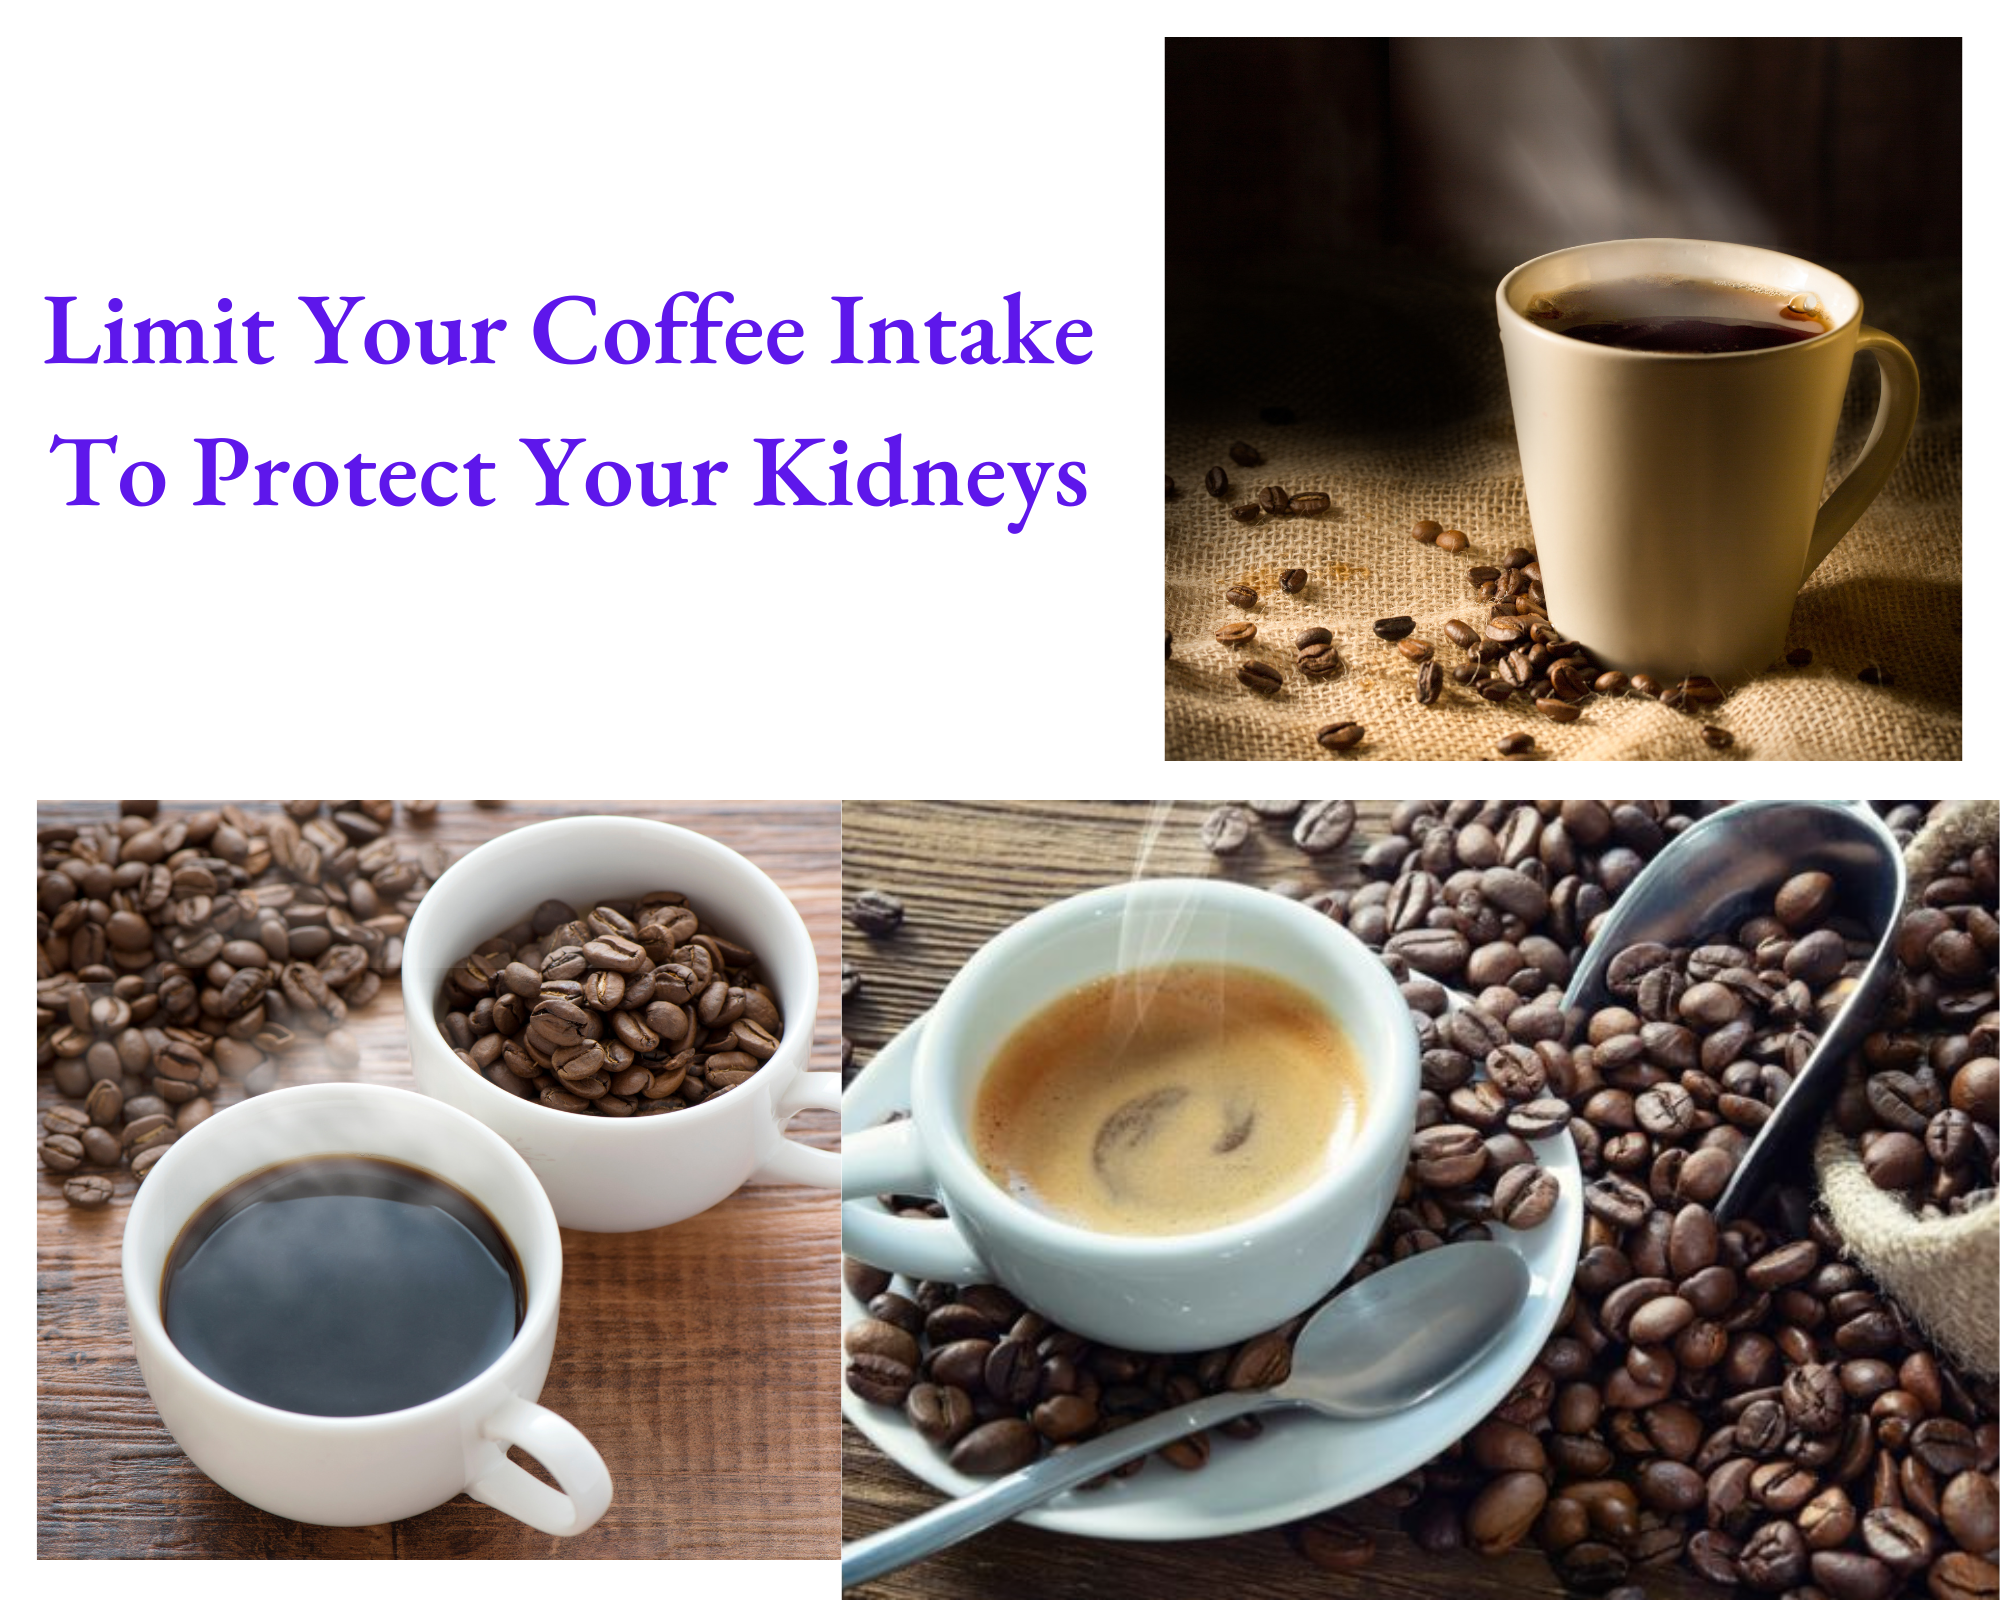 Limit Your Coffee Intake To Protect Your Kidneys